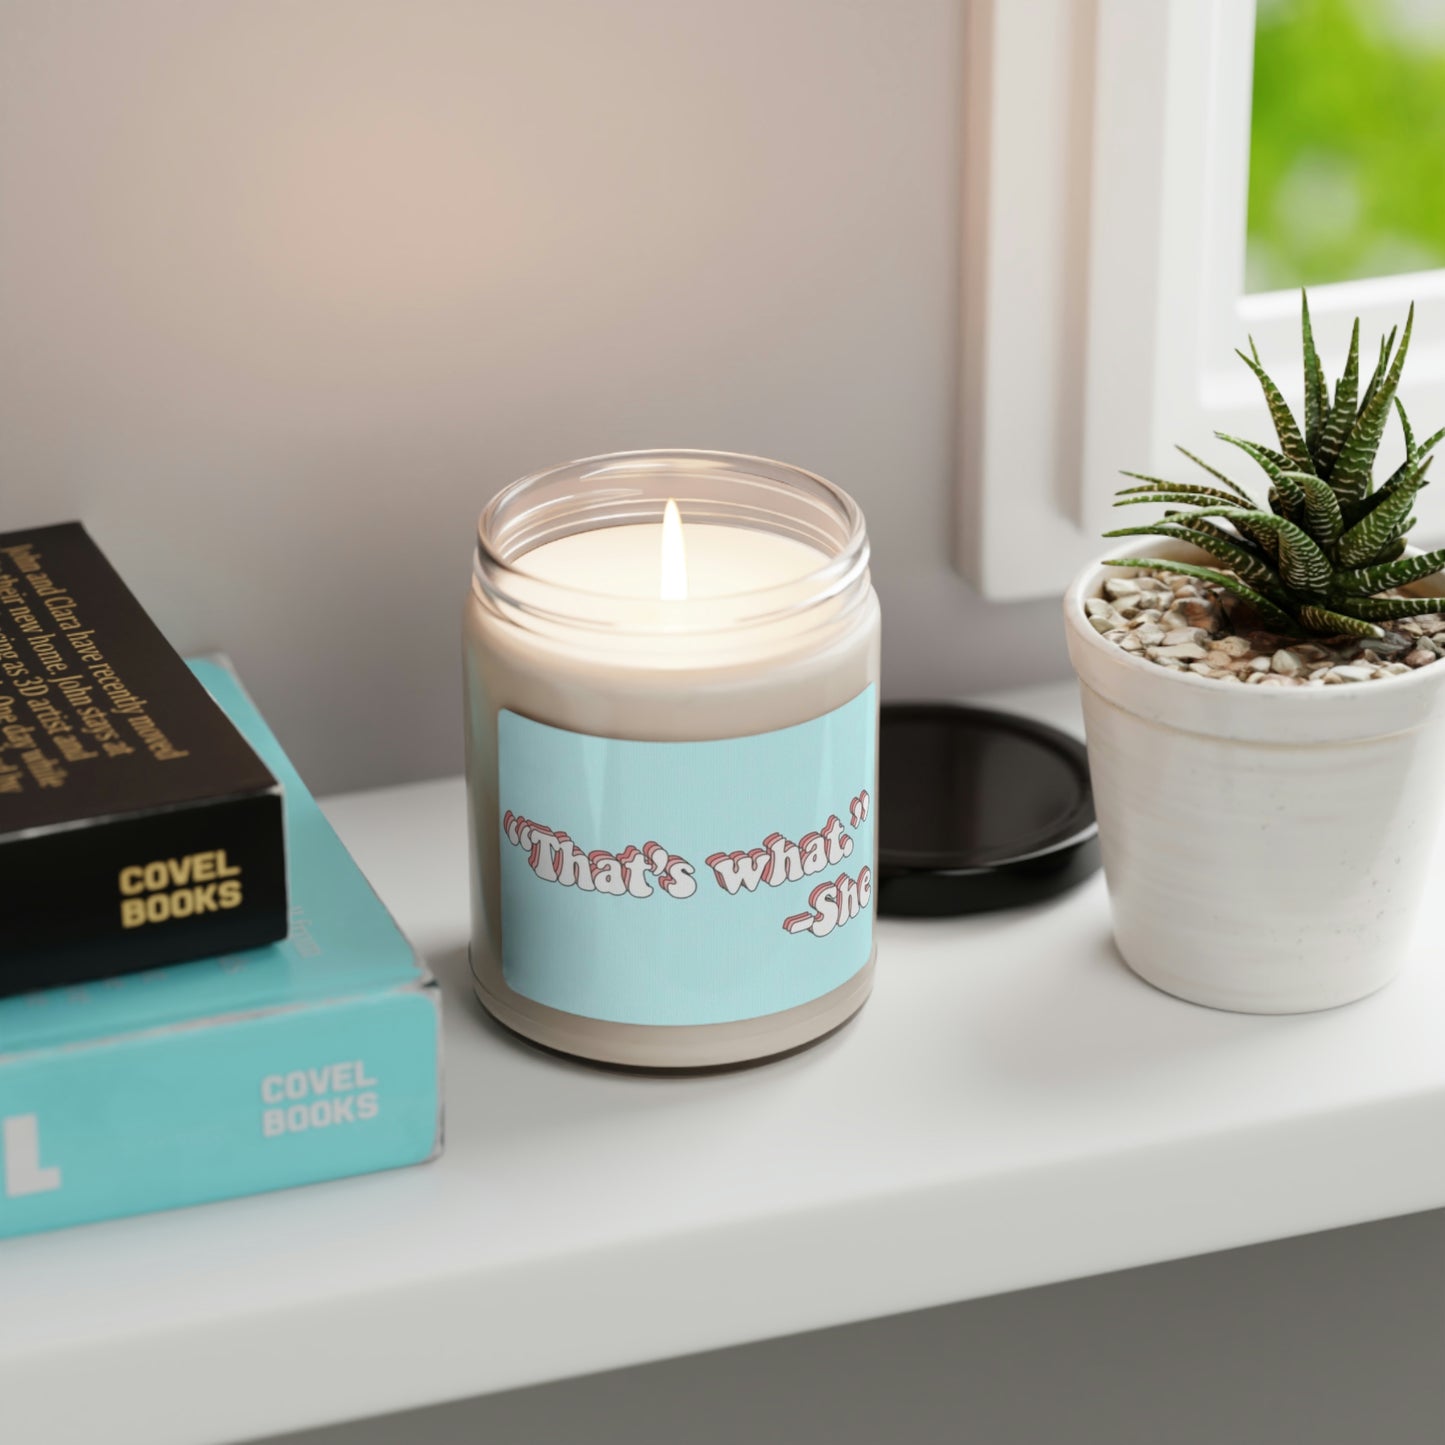 That's What - Scented Soy Candle